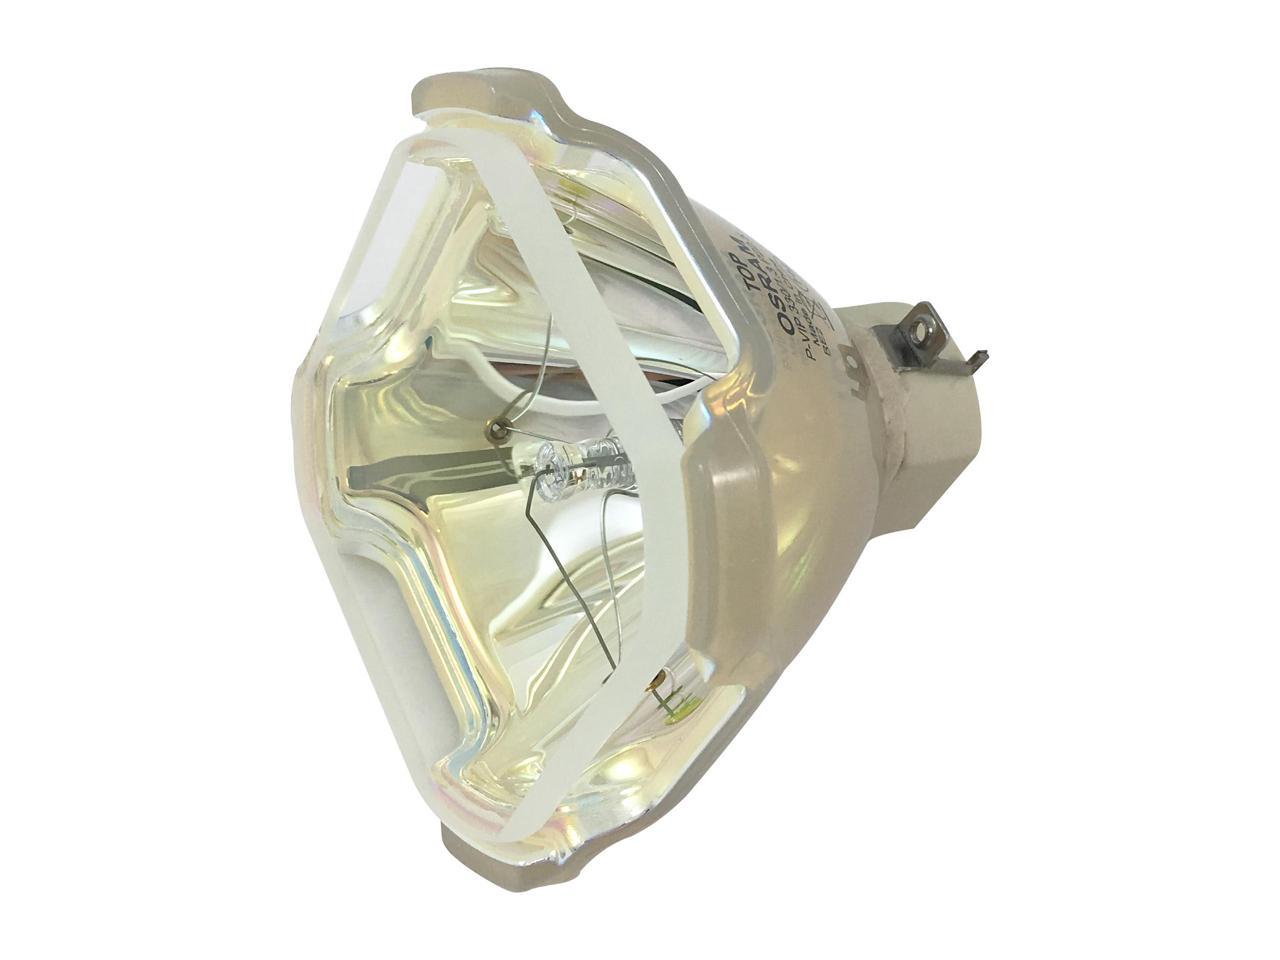 Brand New High Quality Original OEM Osram Projector Bulb P-VIP 280/0.9 E20.9n Osram Replacement Projection Bulb without cage assembly 